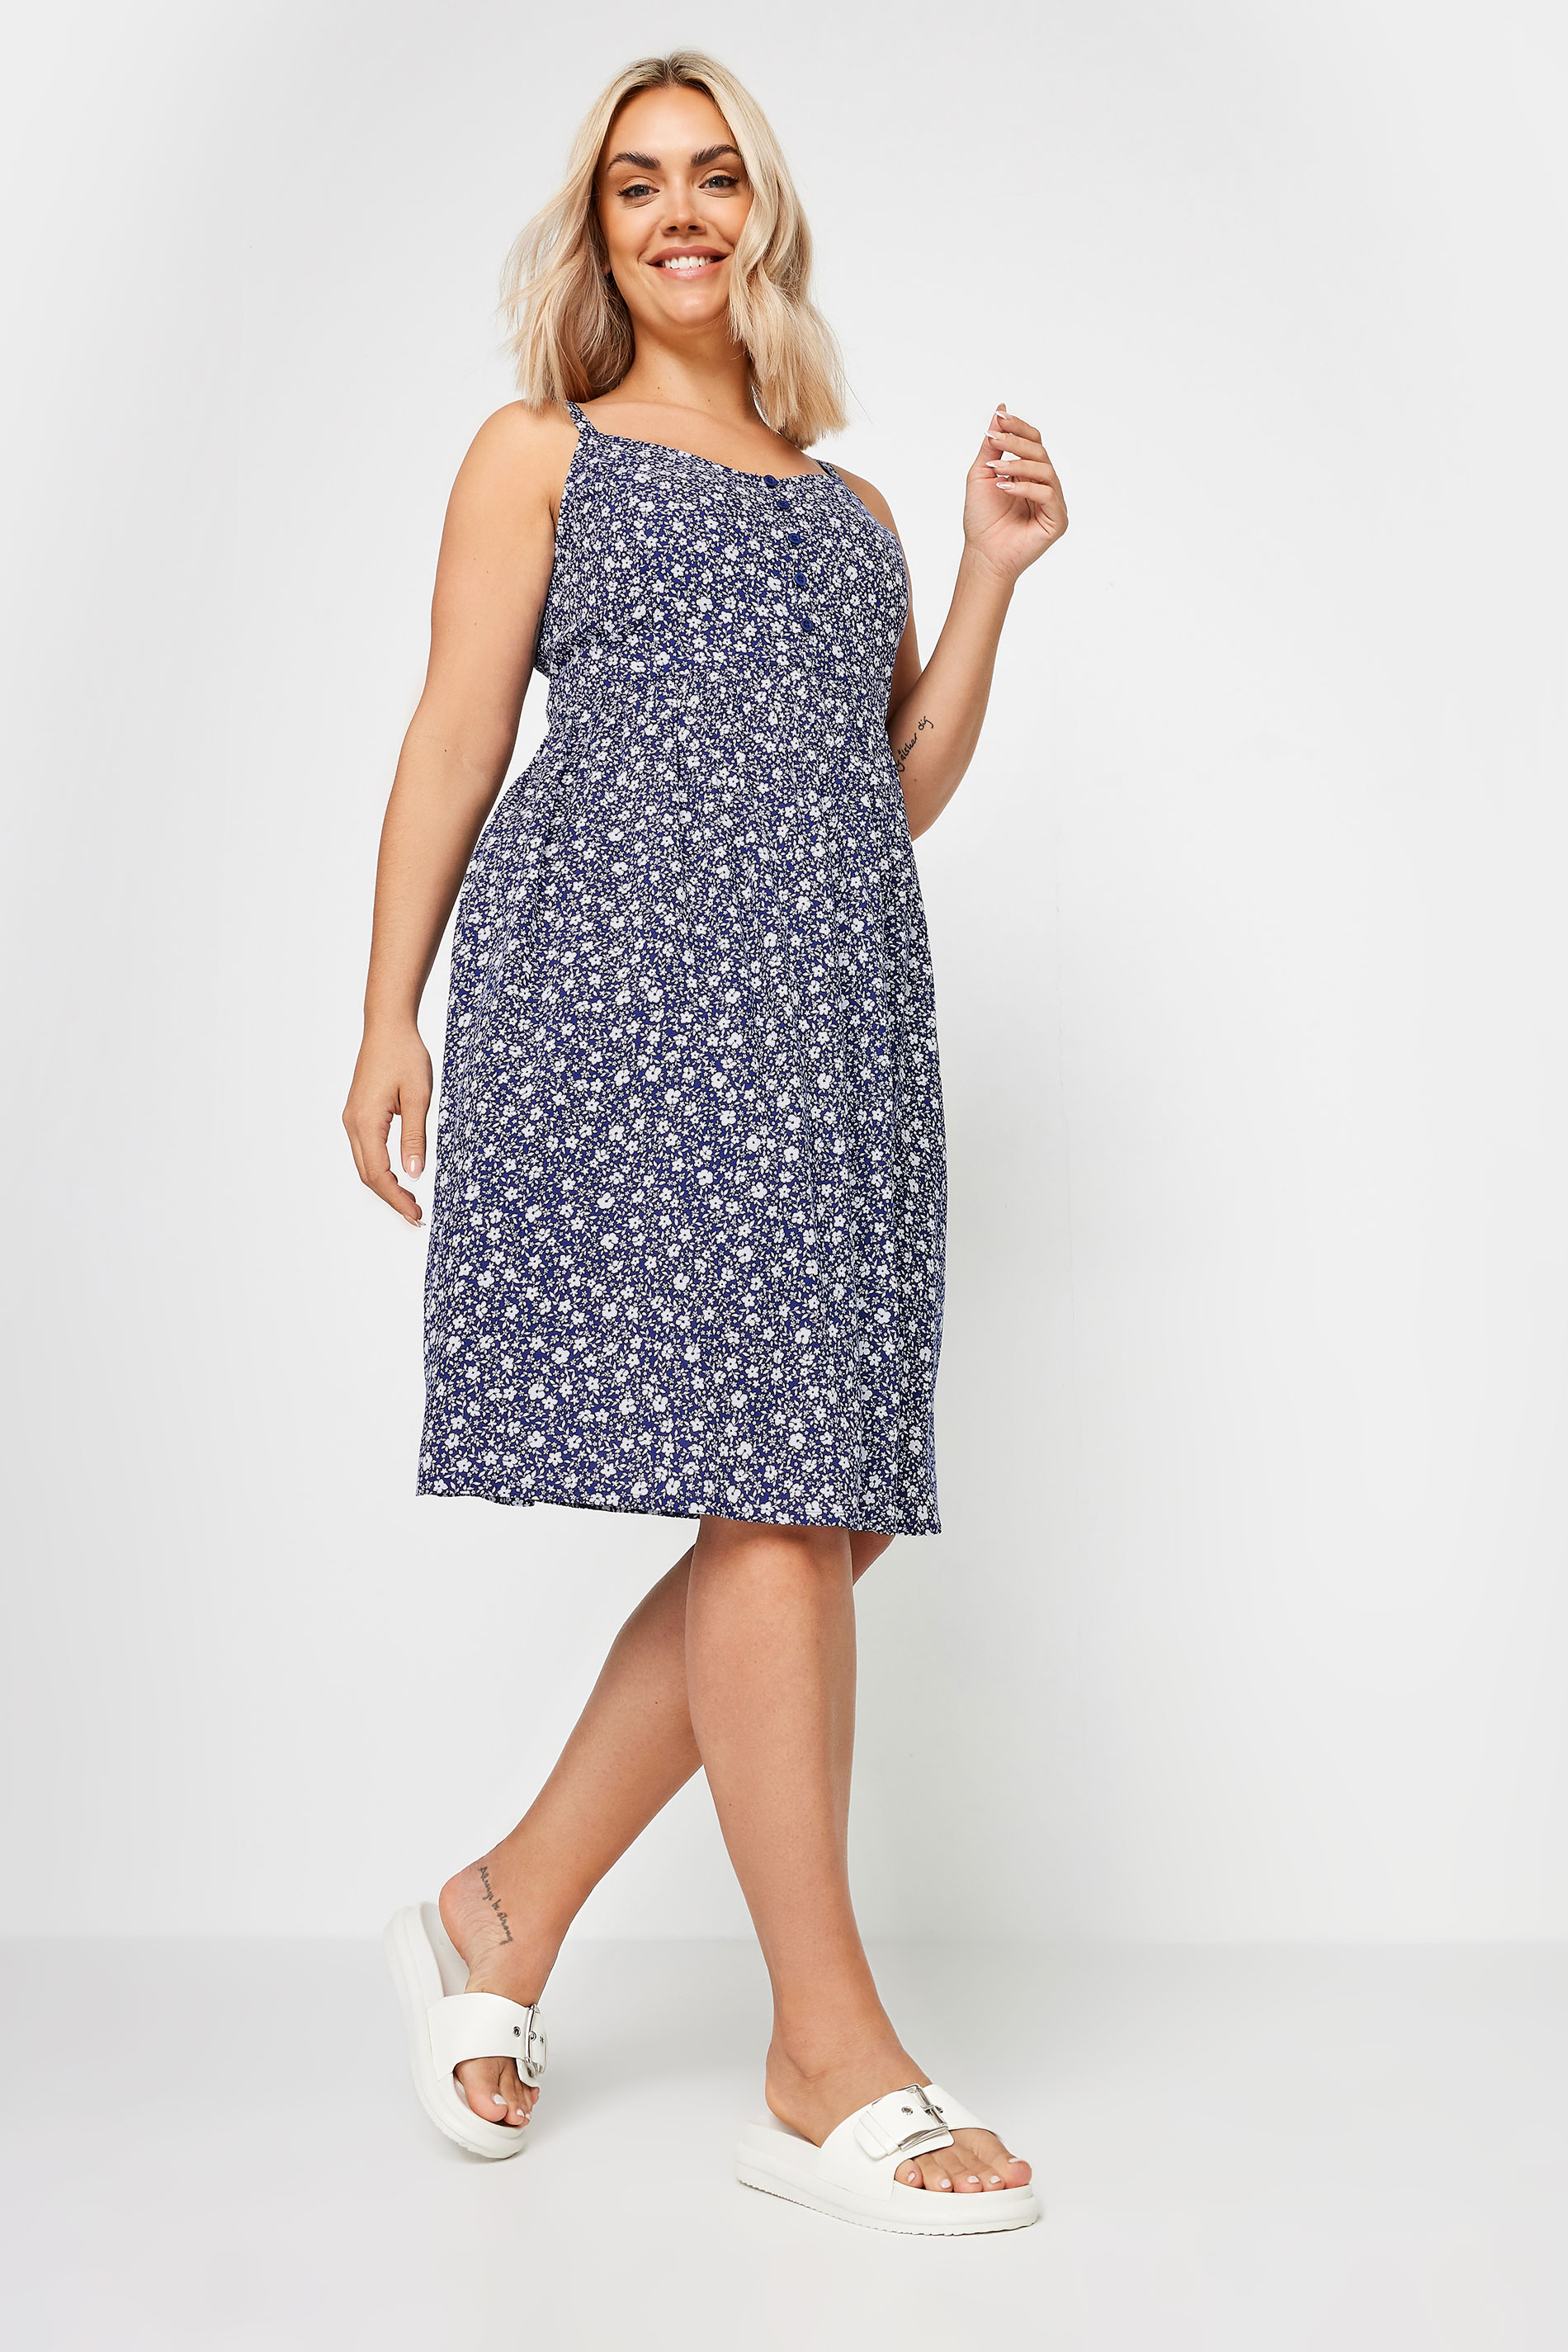 YOURS Plus Size Navy Blue Ditsy Floral Print Strappy Sundress | Yours Clothing 1